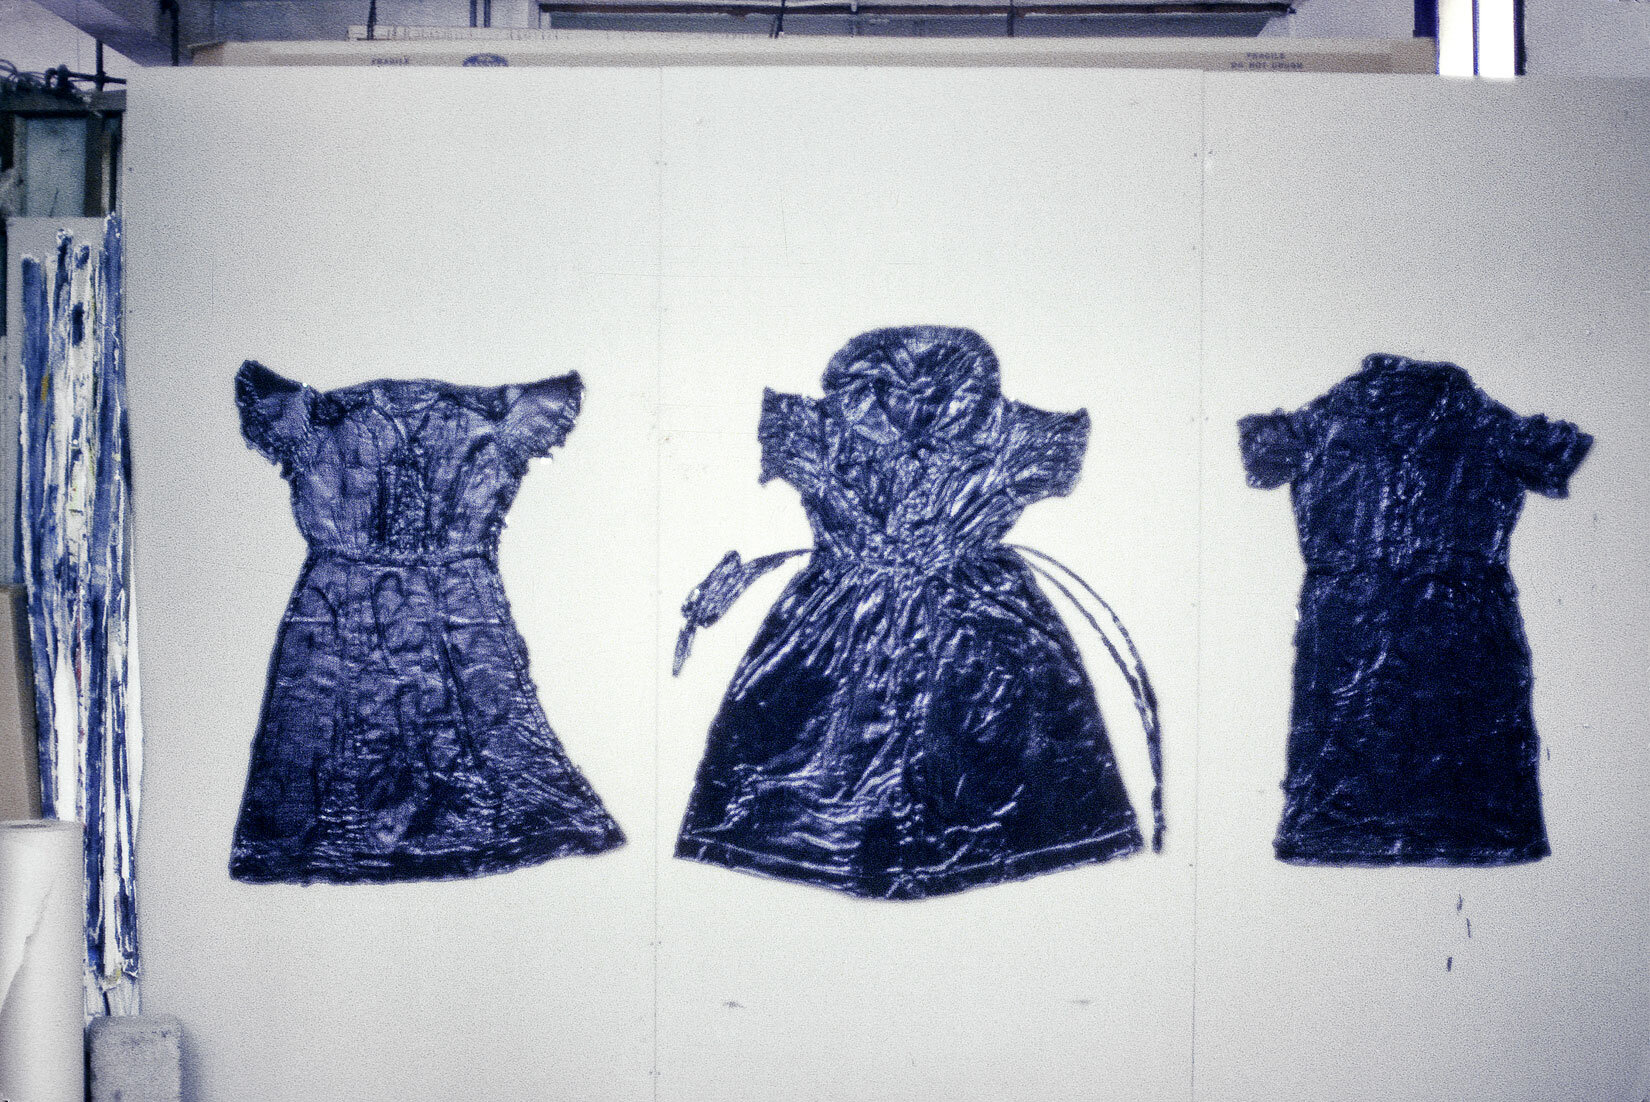   Black Dress Tryptych No. 1, 2 and 3 , 1978, acrylic latex enamel, 40’s cotton dresses 